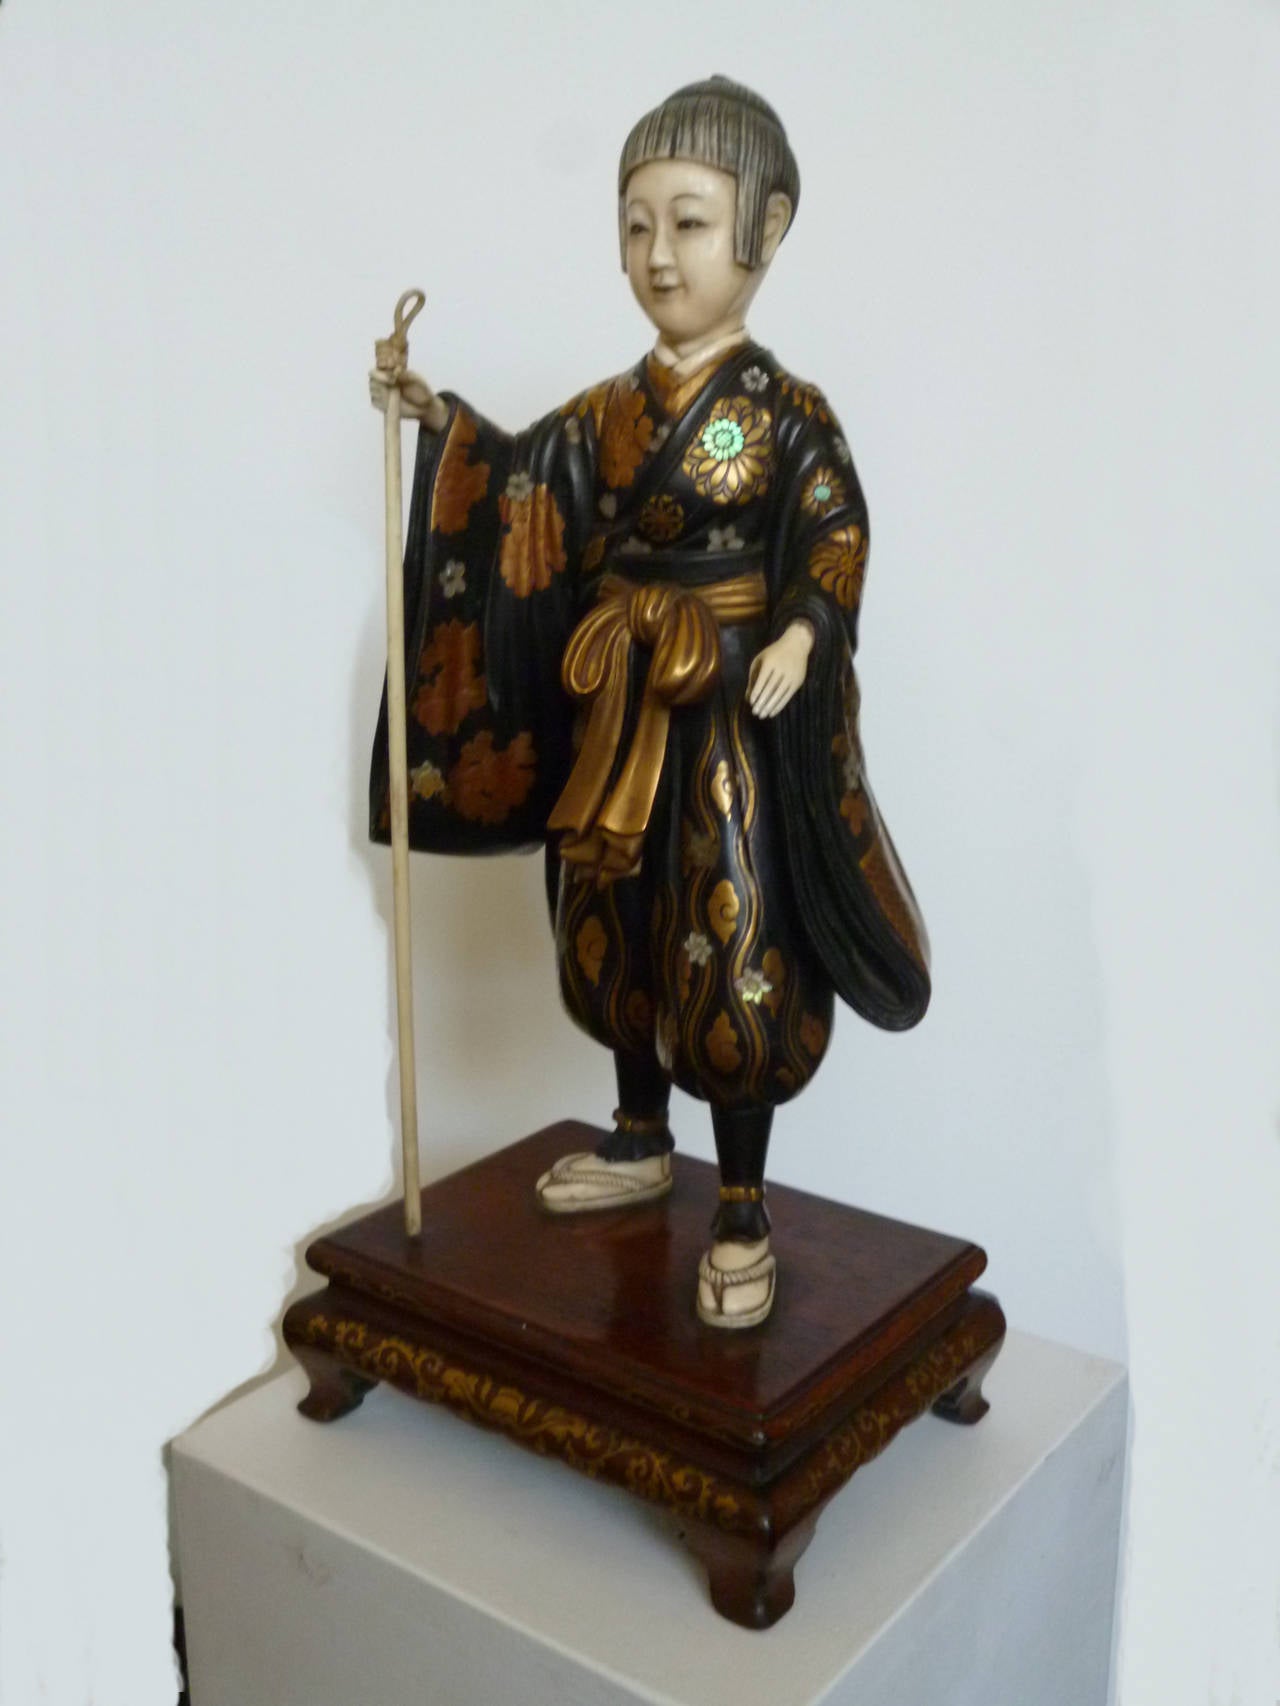 A very fine carving from Japan, Meiji period circa 1900. On rectangular wooden base. Rich gilded, with inlaid mother-of-pearl. Hands, feet, head and a pole are made of ivory. Elaborate surface decoration. Beautiful facial features.
Measures: Height